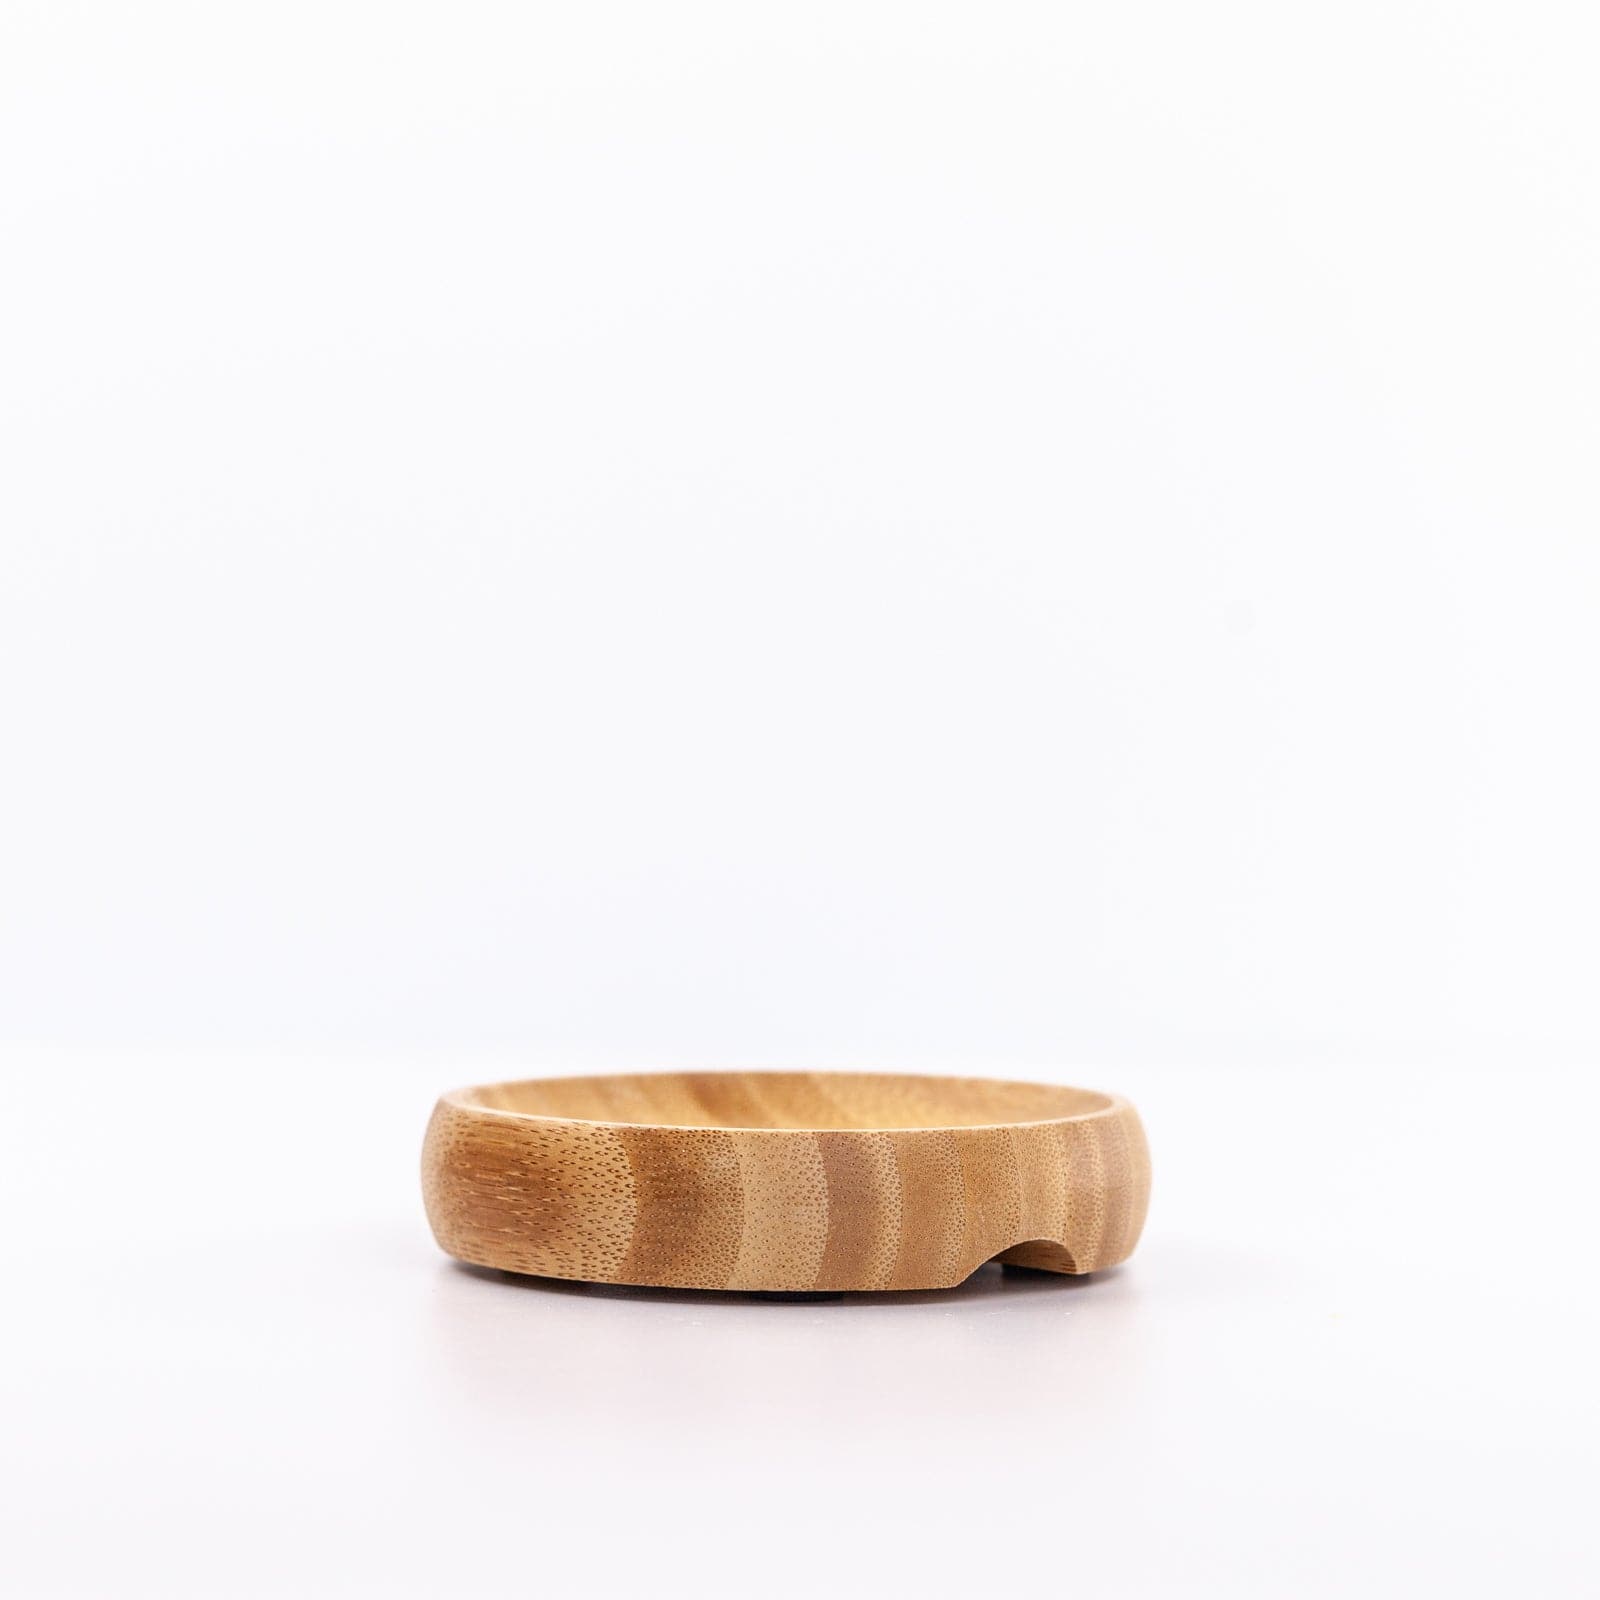 Round wooden soap dish's side